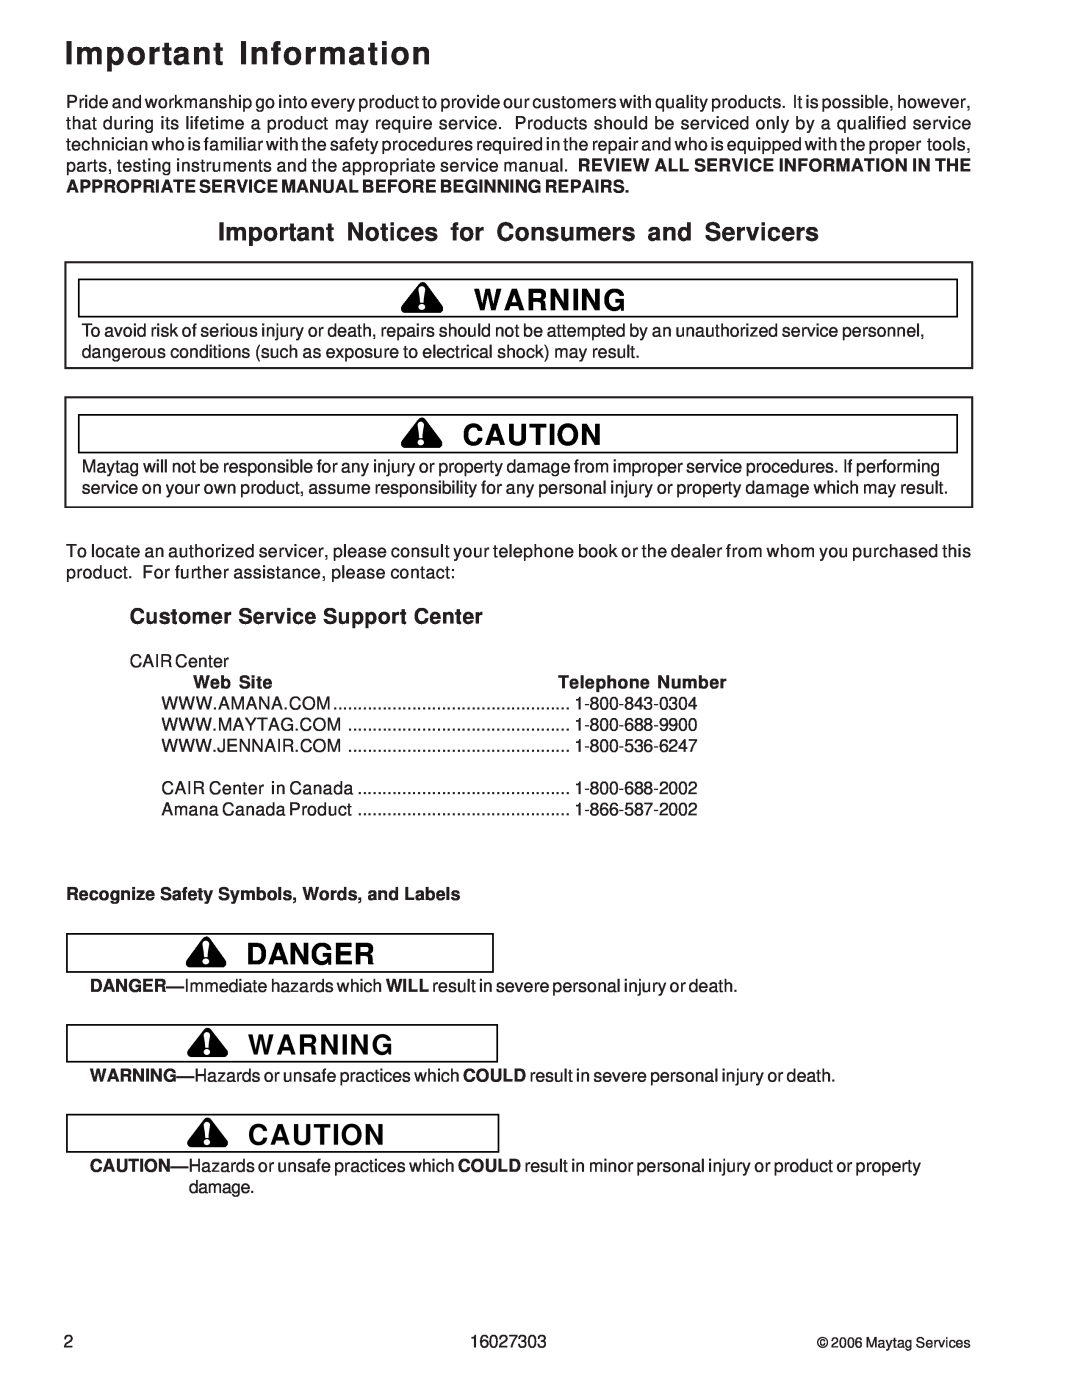 Maytag UMV1152CA Important Information, Danger, Important Notices for Consumers and Servicers, Web Site, Telephone Number 